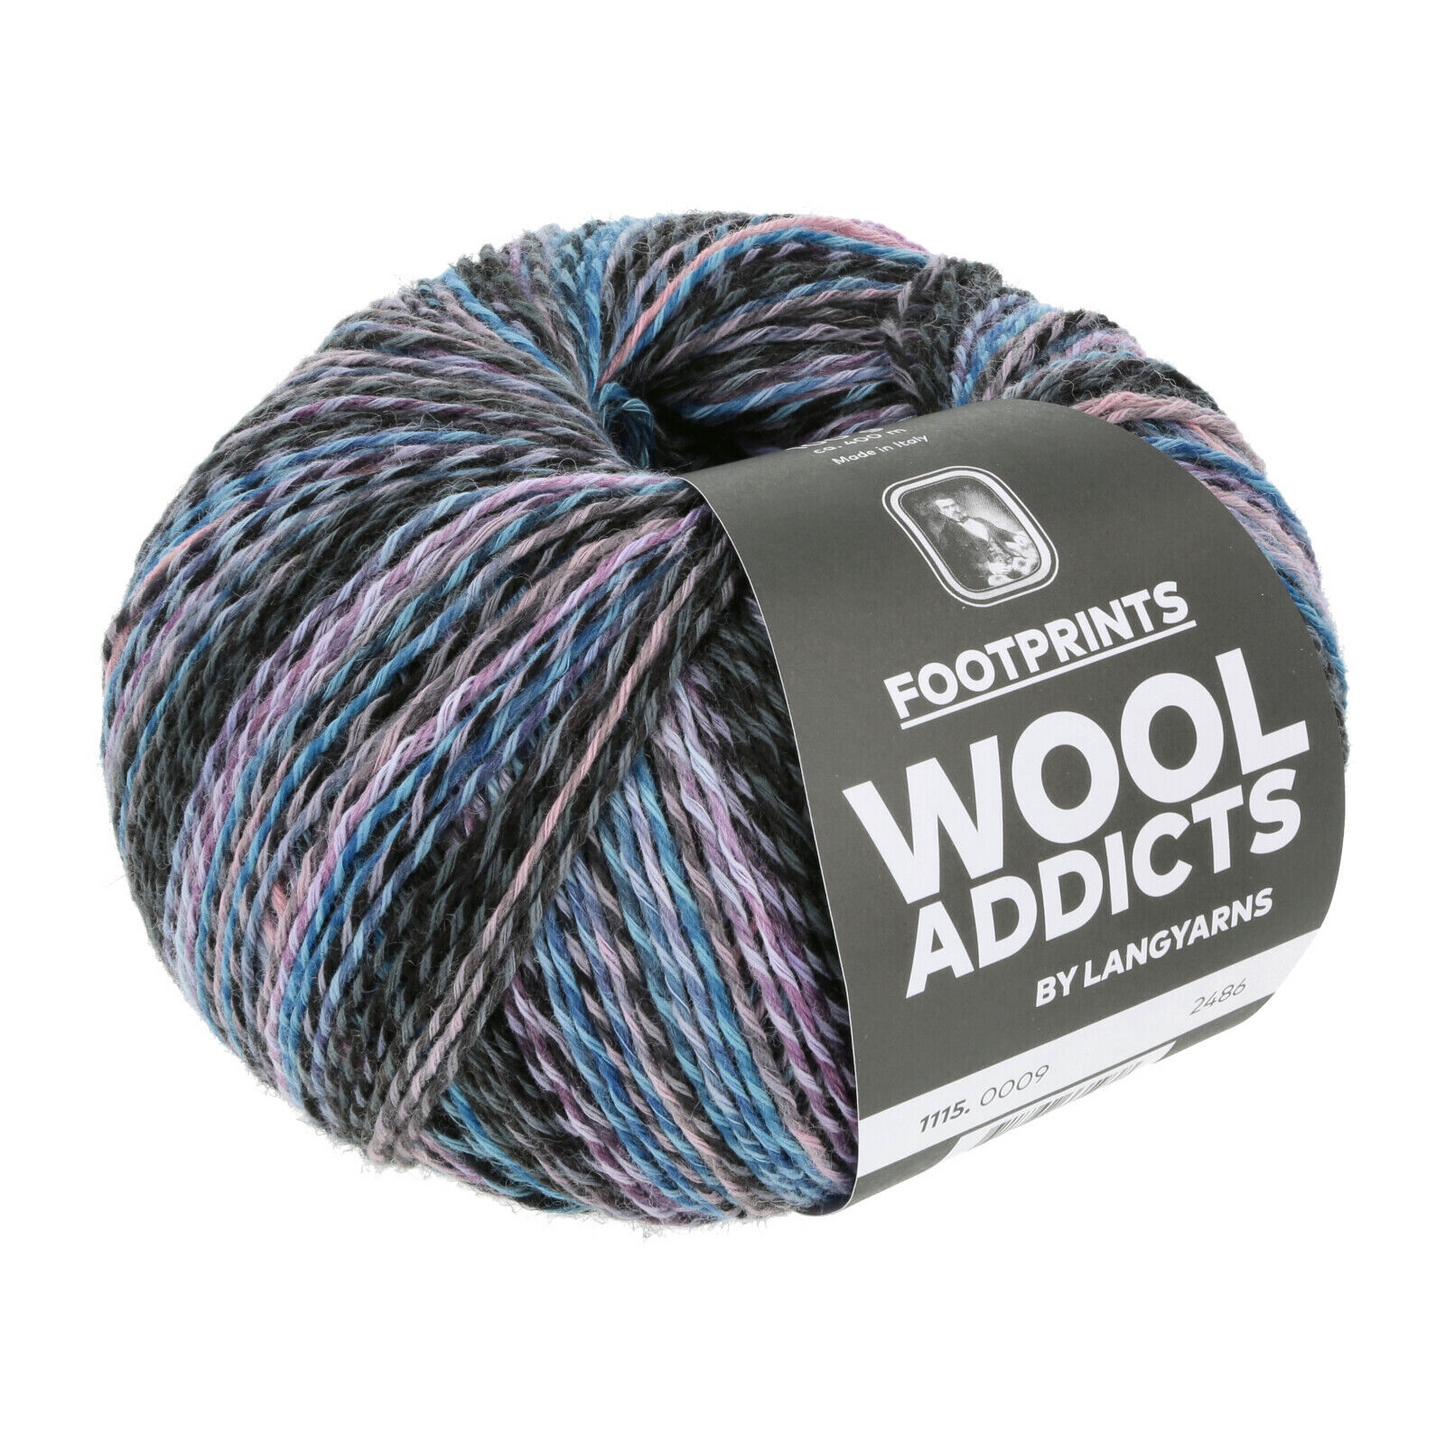 WOOL ADDICTS by Langyarns